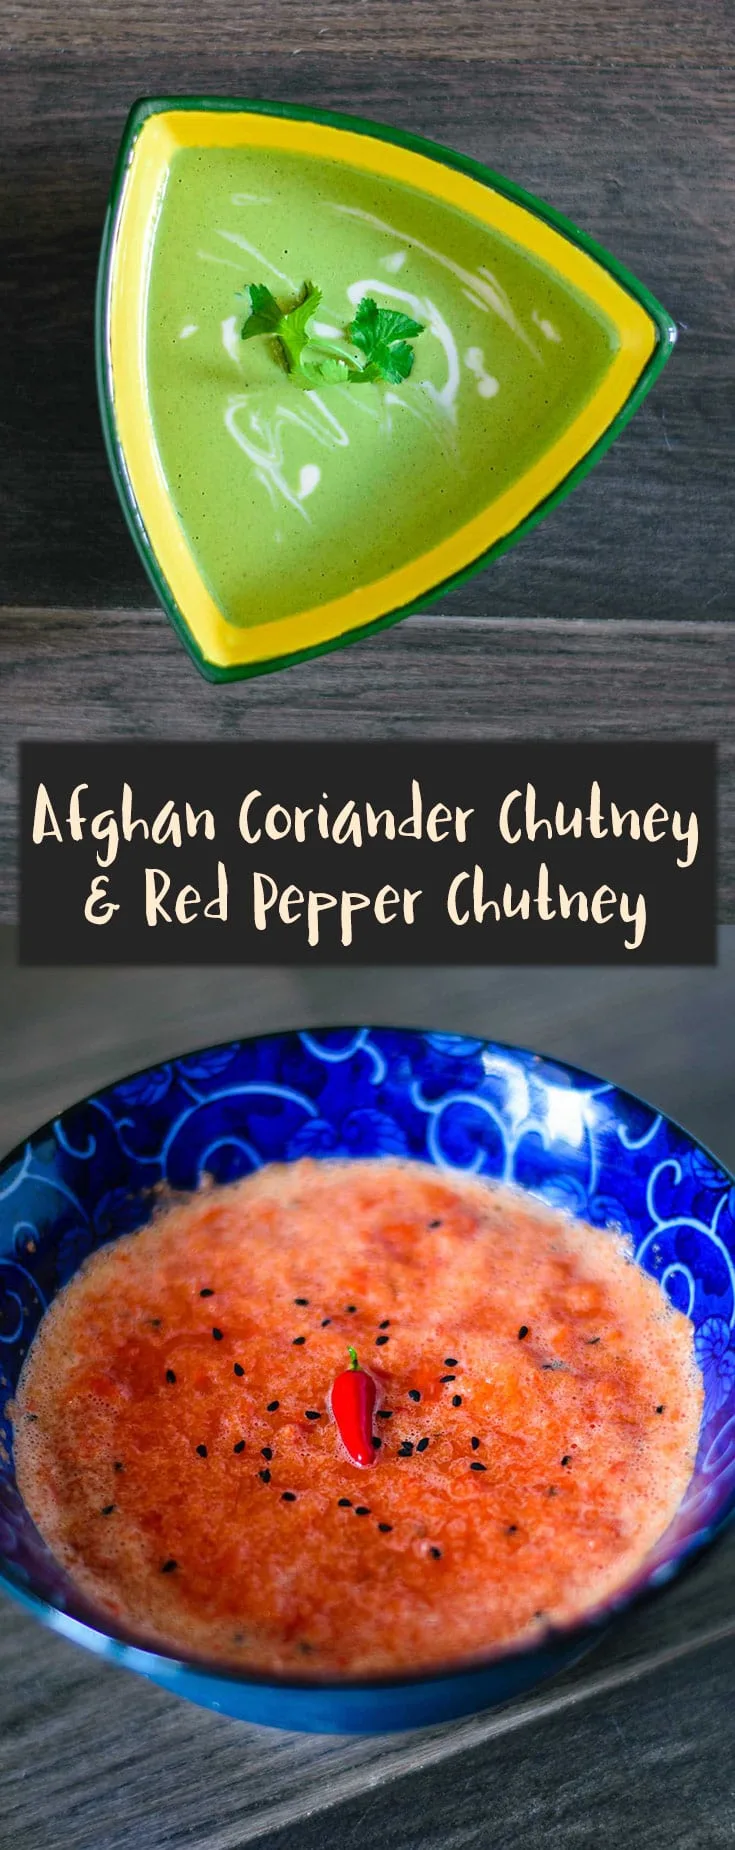 Afghan Coriander Chutney is creamy, garlicky and a bit spicy while Red Pepper Chutney is sweet and spicy. These two easy Afghan chutneys are the perfect accompaniment to your meal! | thecuriouschickpea.com #vegan #glutenfree #Afghanfood